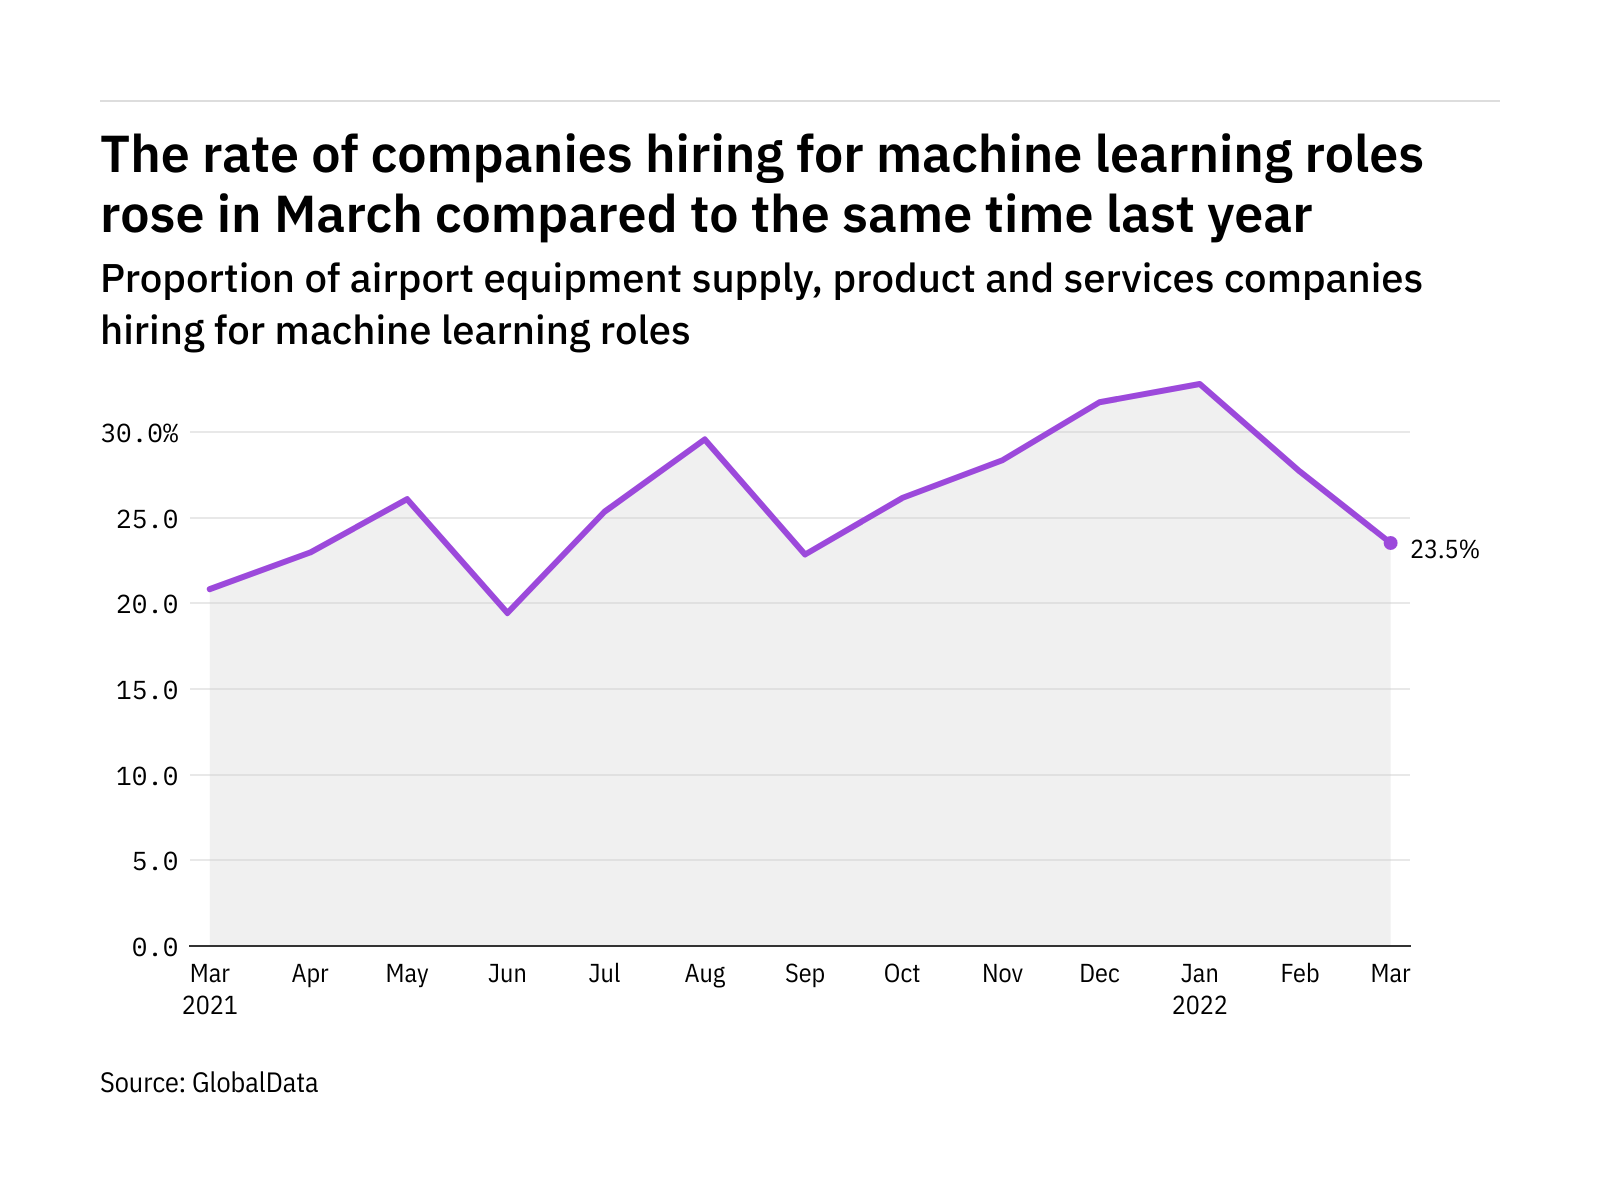 Machine learning hiring levels in the airport industry rose in March 2022